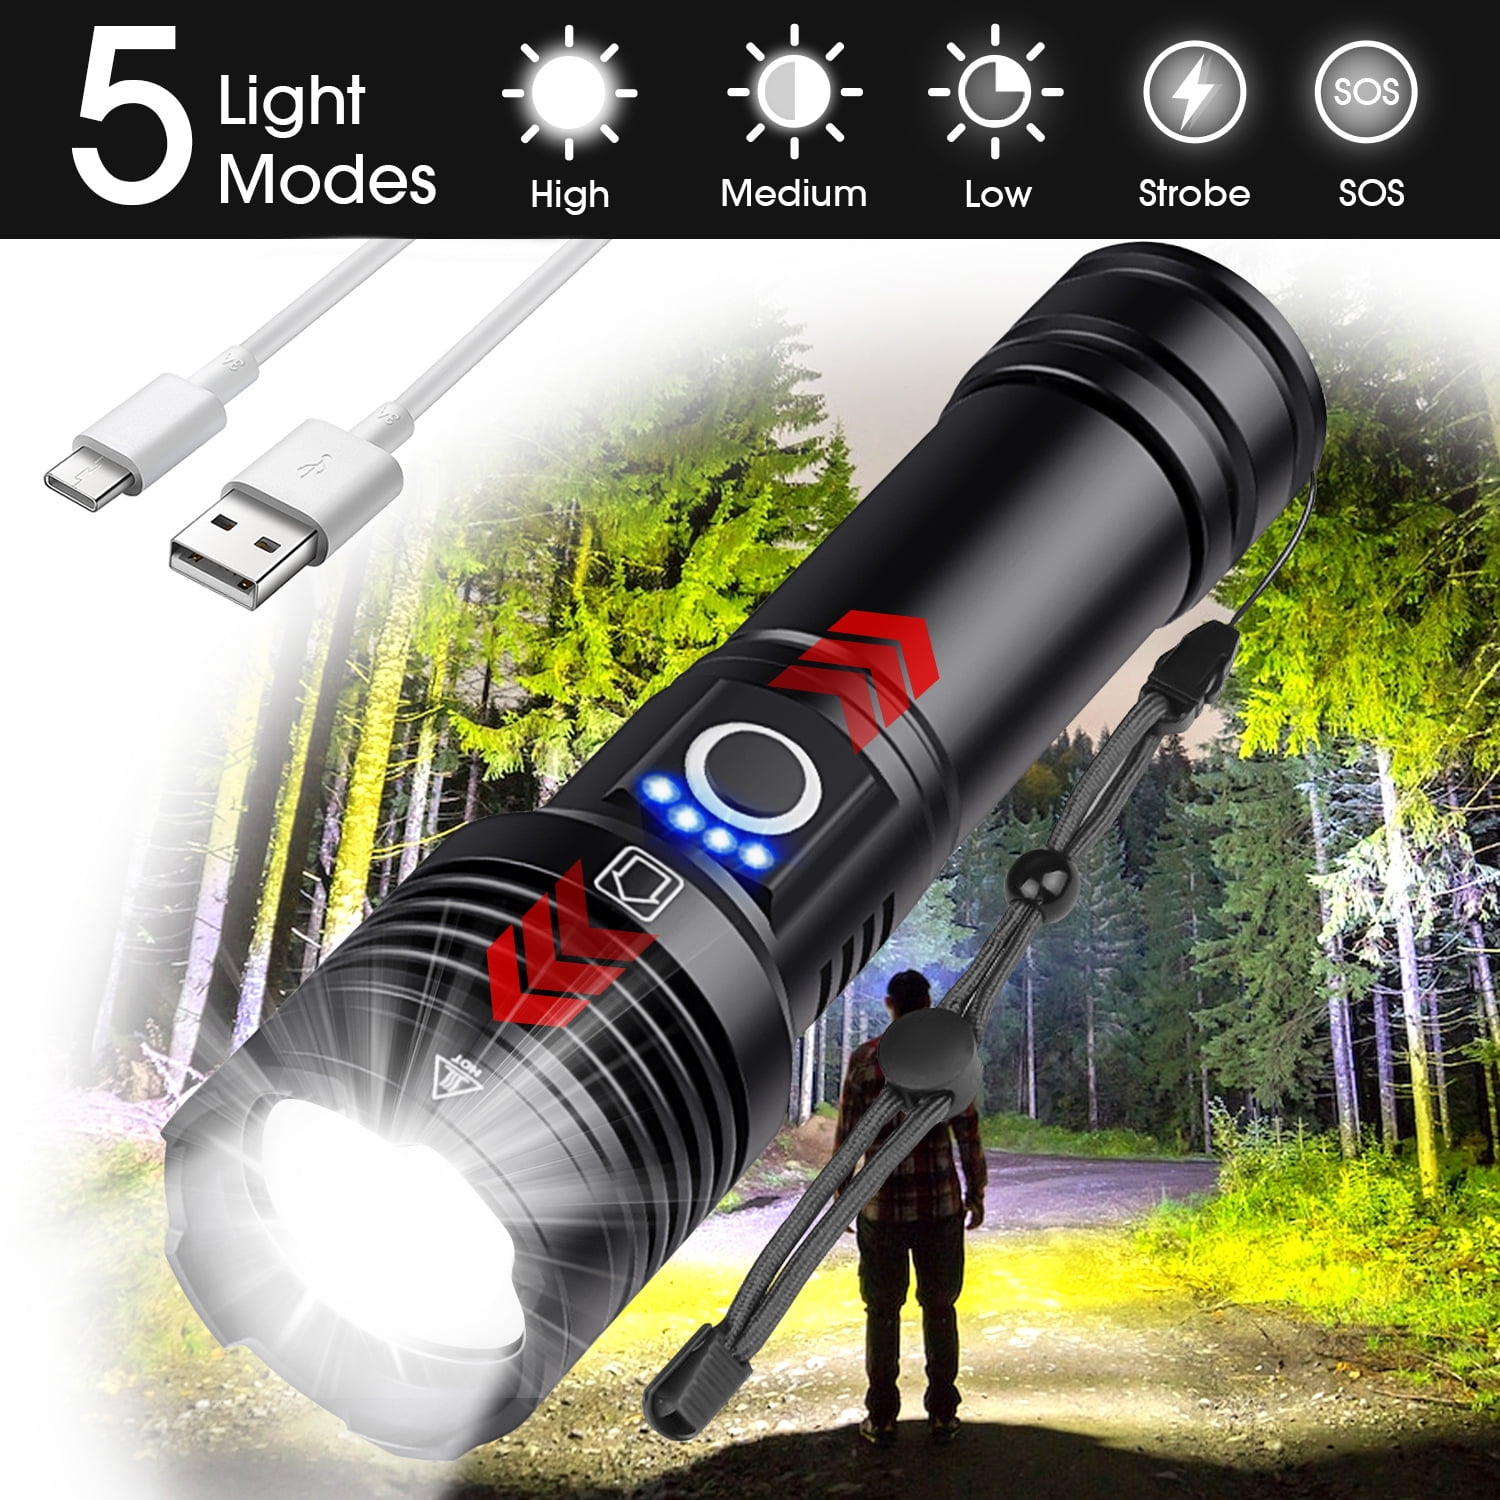 90000 Flashlight , Waterproof Searchlight, USB Zoom Torch Super Bright Tactical LED Flashlight for Camping, Hiking Hunting - Walmart.com